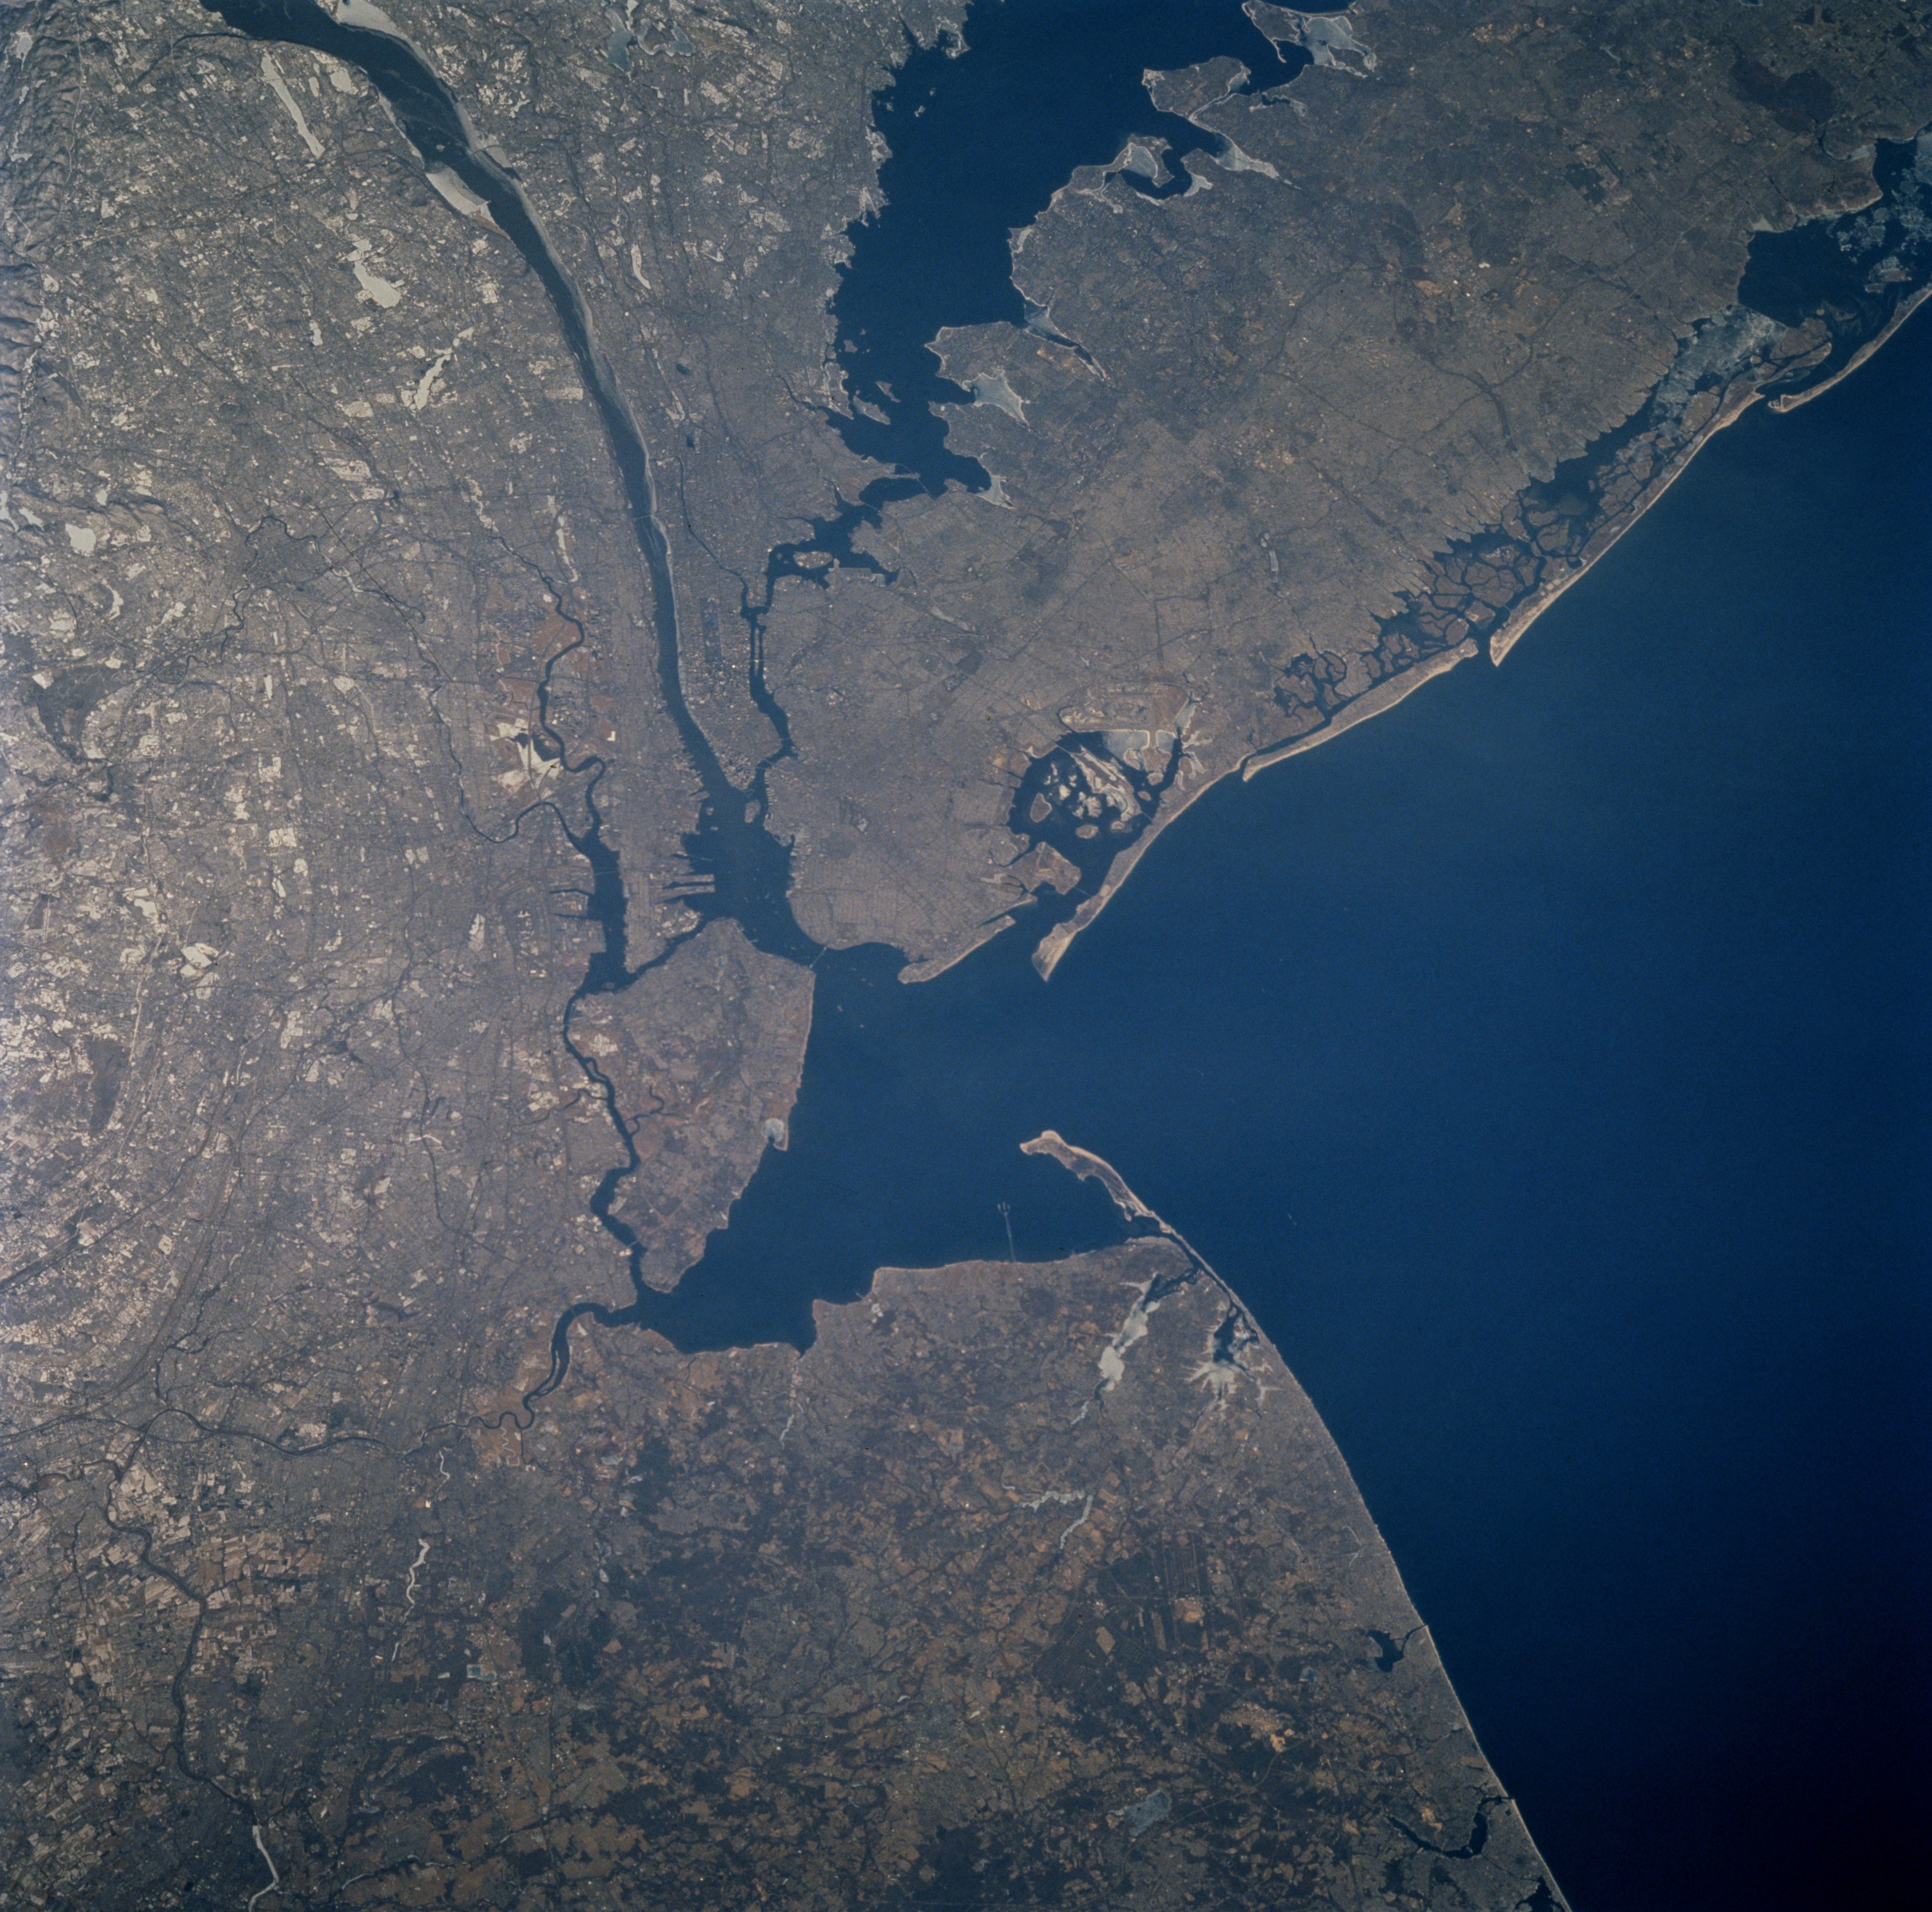 STS-60 Earth observation photographs of North American city New York City